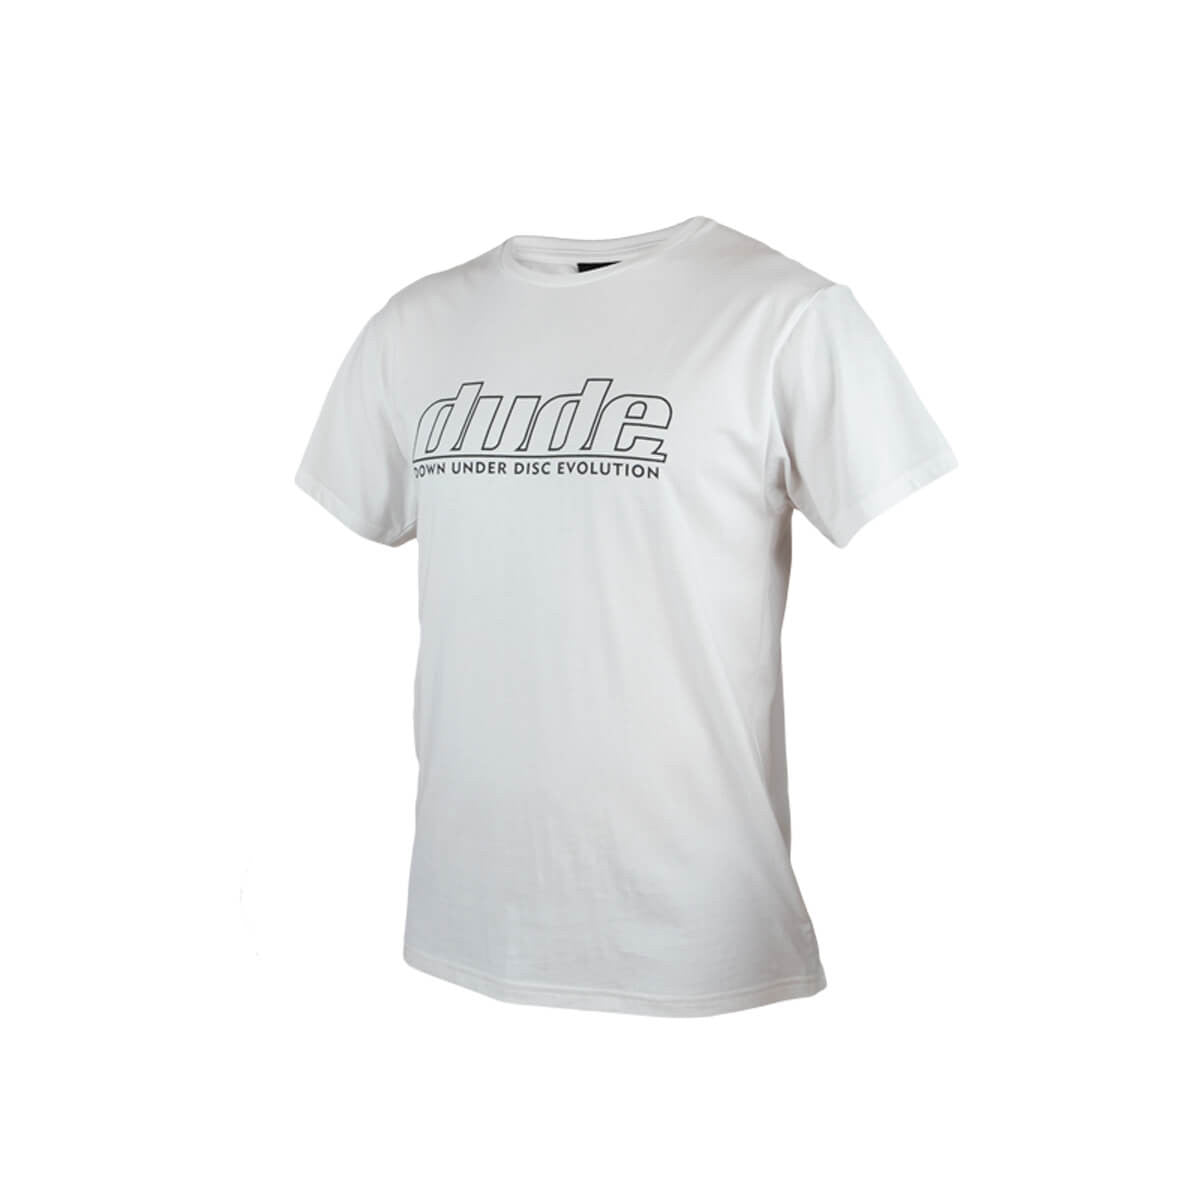 Cotton Corporate Tee - Dude Clothing - 2